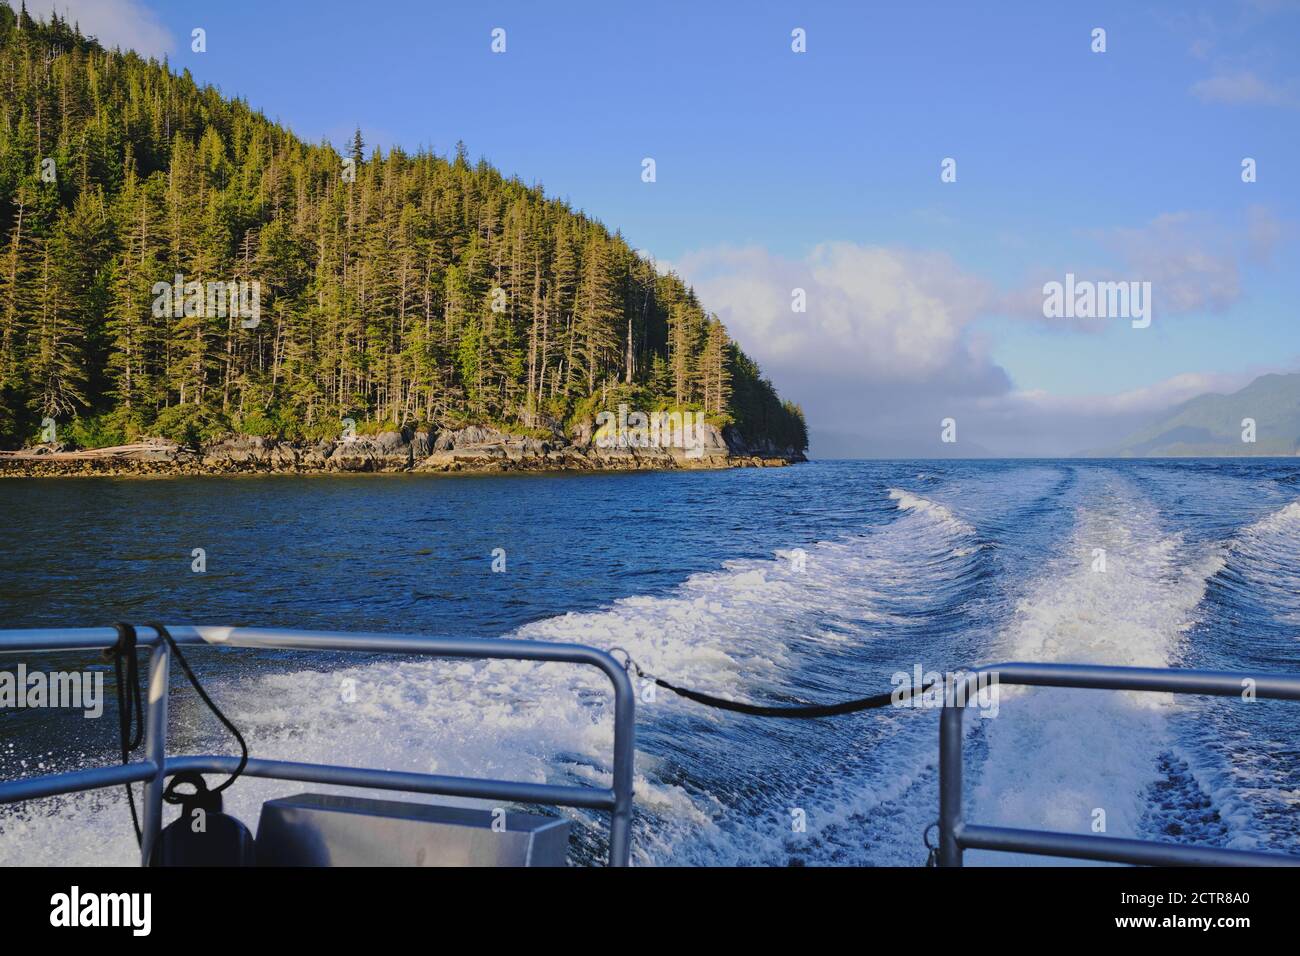 Dense forest grows right down to steep, rocky shoreline of Knight Inlet - Canada's largest fjord.  Wake produced behind a small boat sparkles Stock Photo